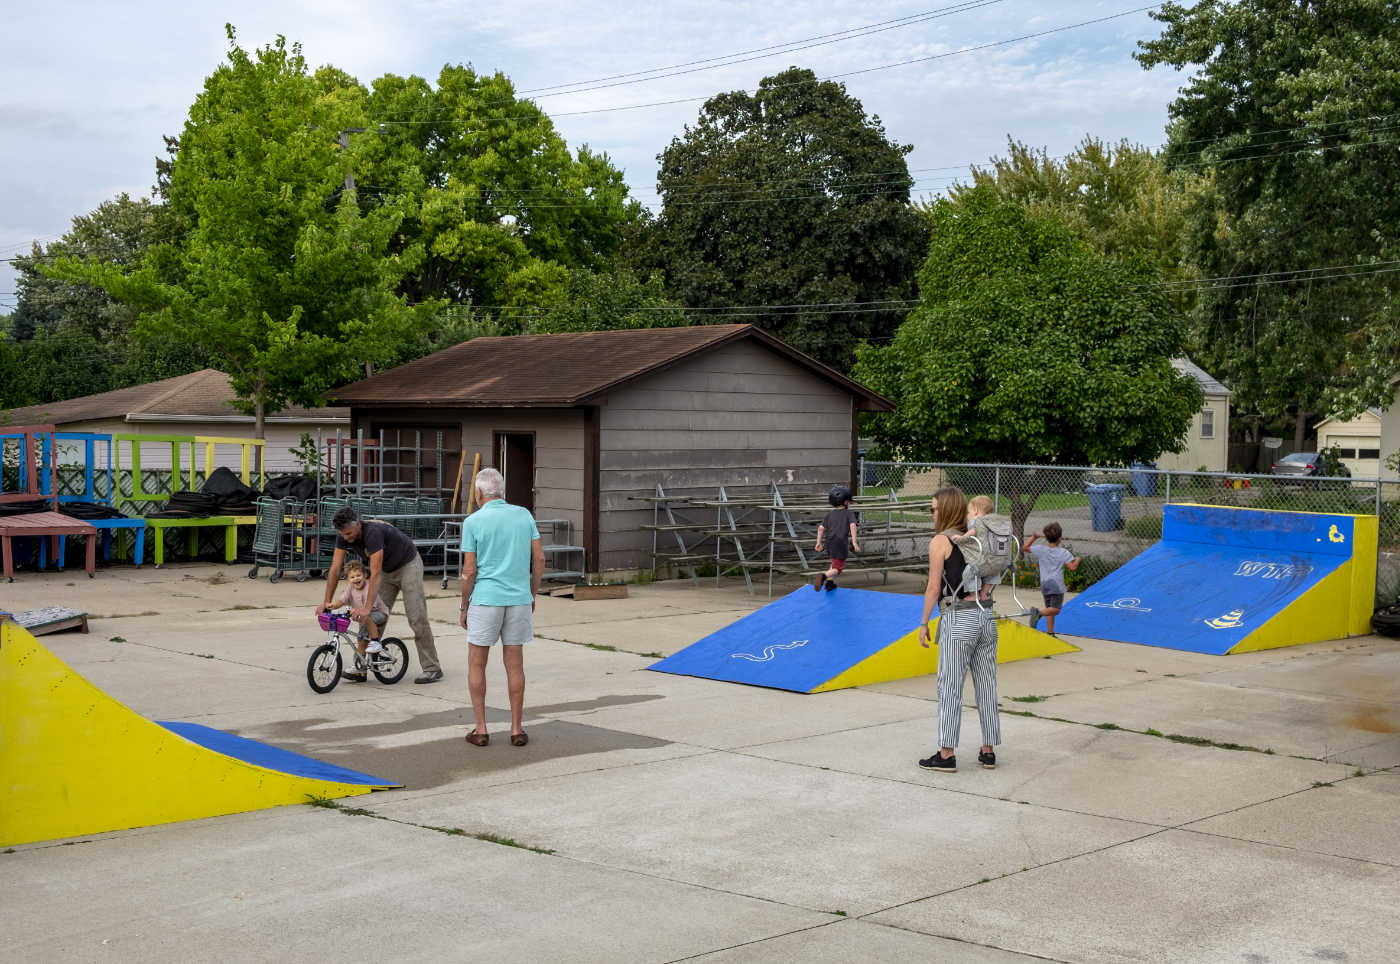 a few adults play with a few youngsters, one on a small bicycle, in a paved lot with small ramps